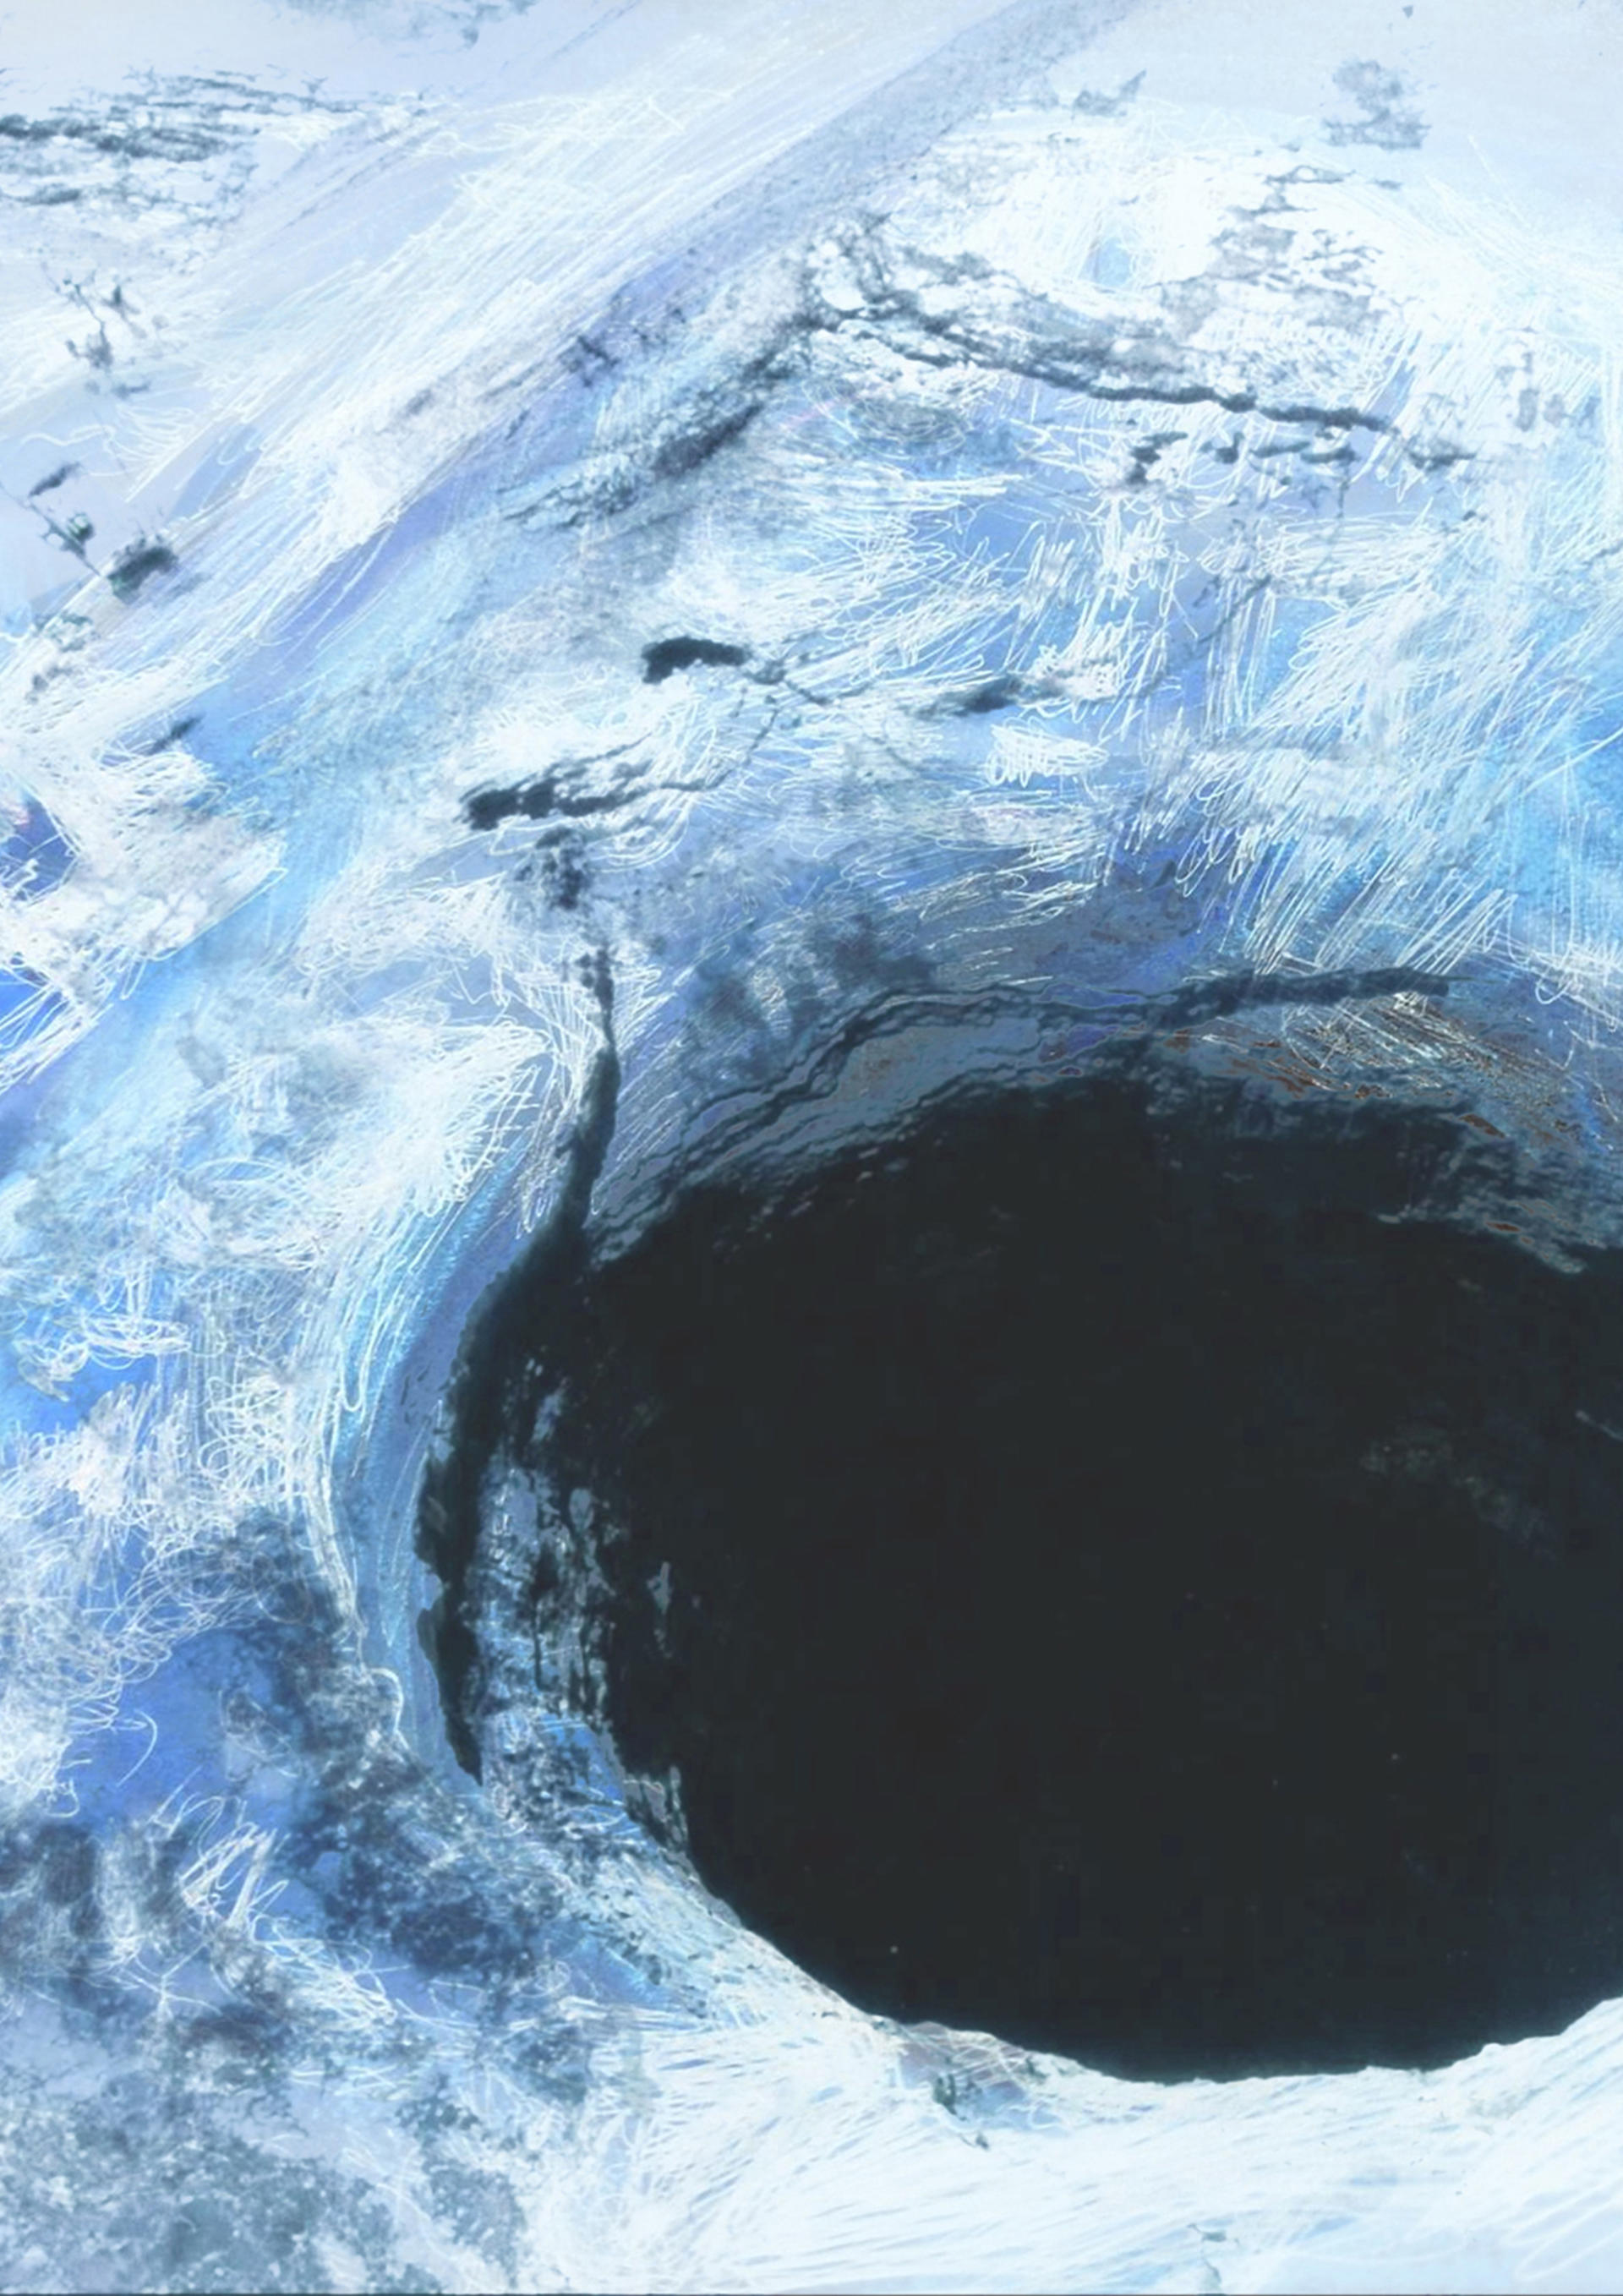 A mixed-media illustration shows a cavernous black hole in a blue-grey sandy landscape. Gestural lines hint at a worksite nearby.